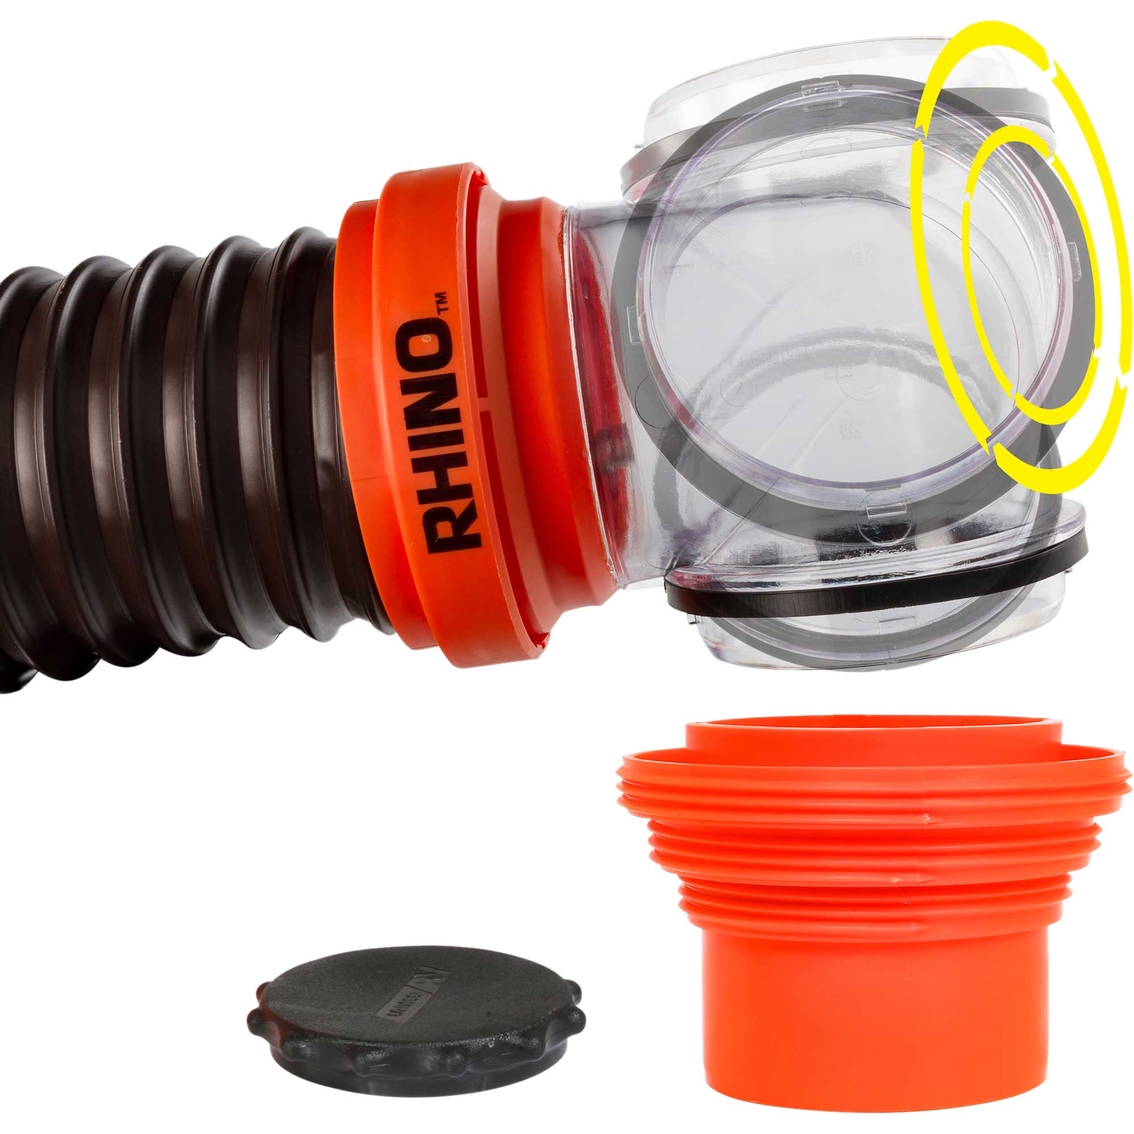 Camco RhinoFLEX 15 ft. Sewer Hose Kit with 4 in 1 Elbow Caps - Image 4 of 8